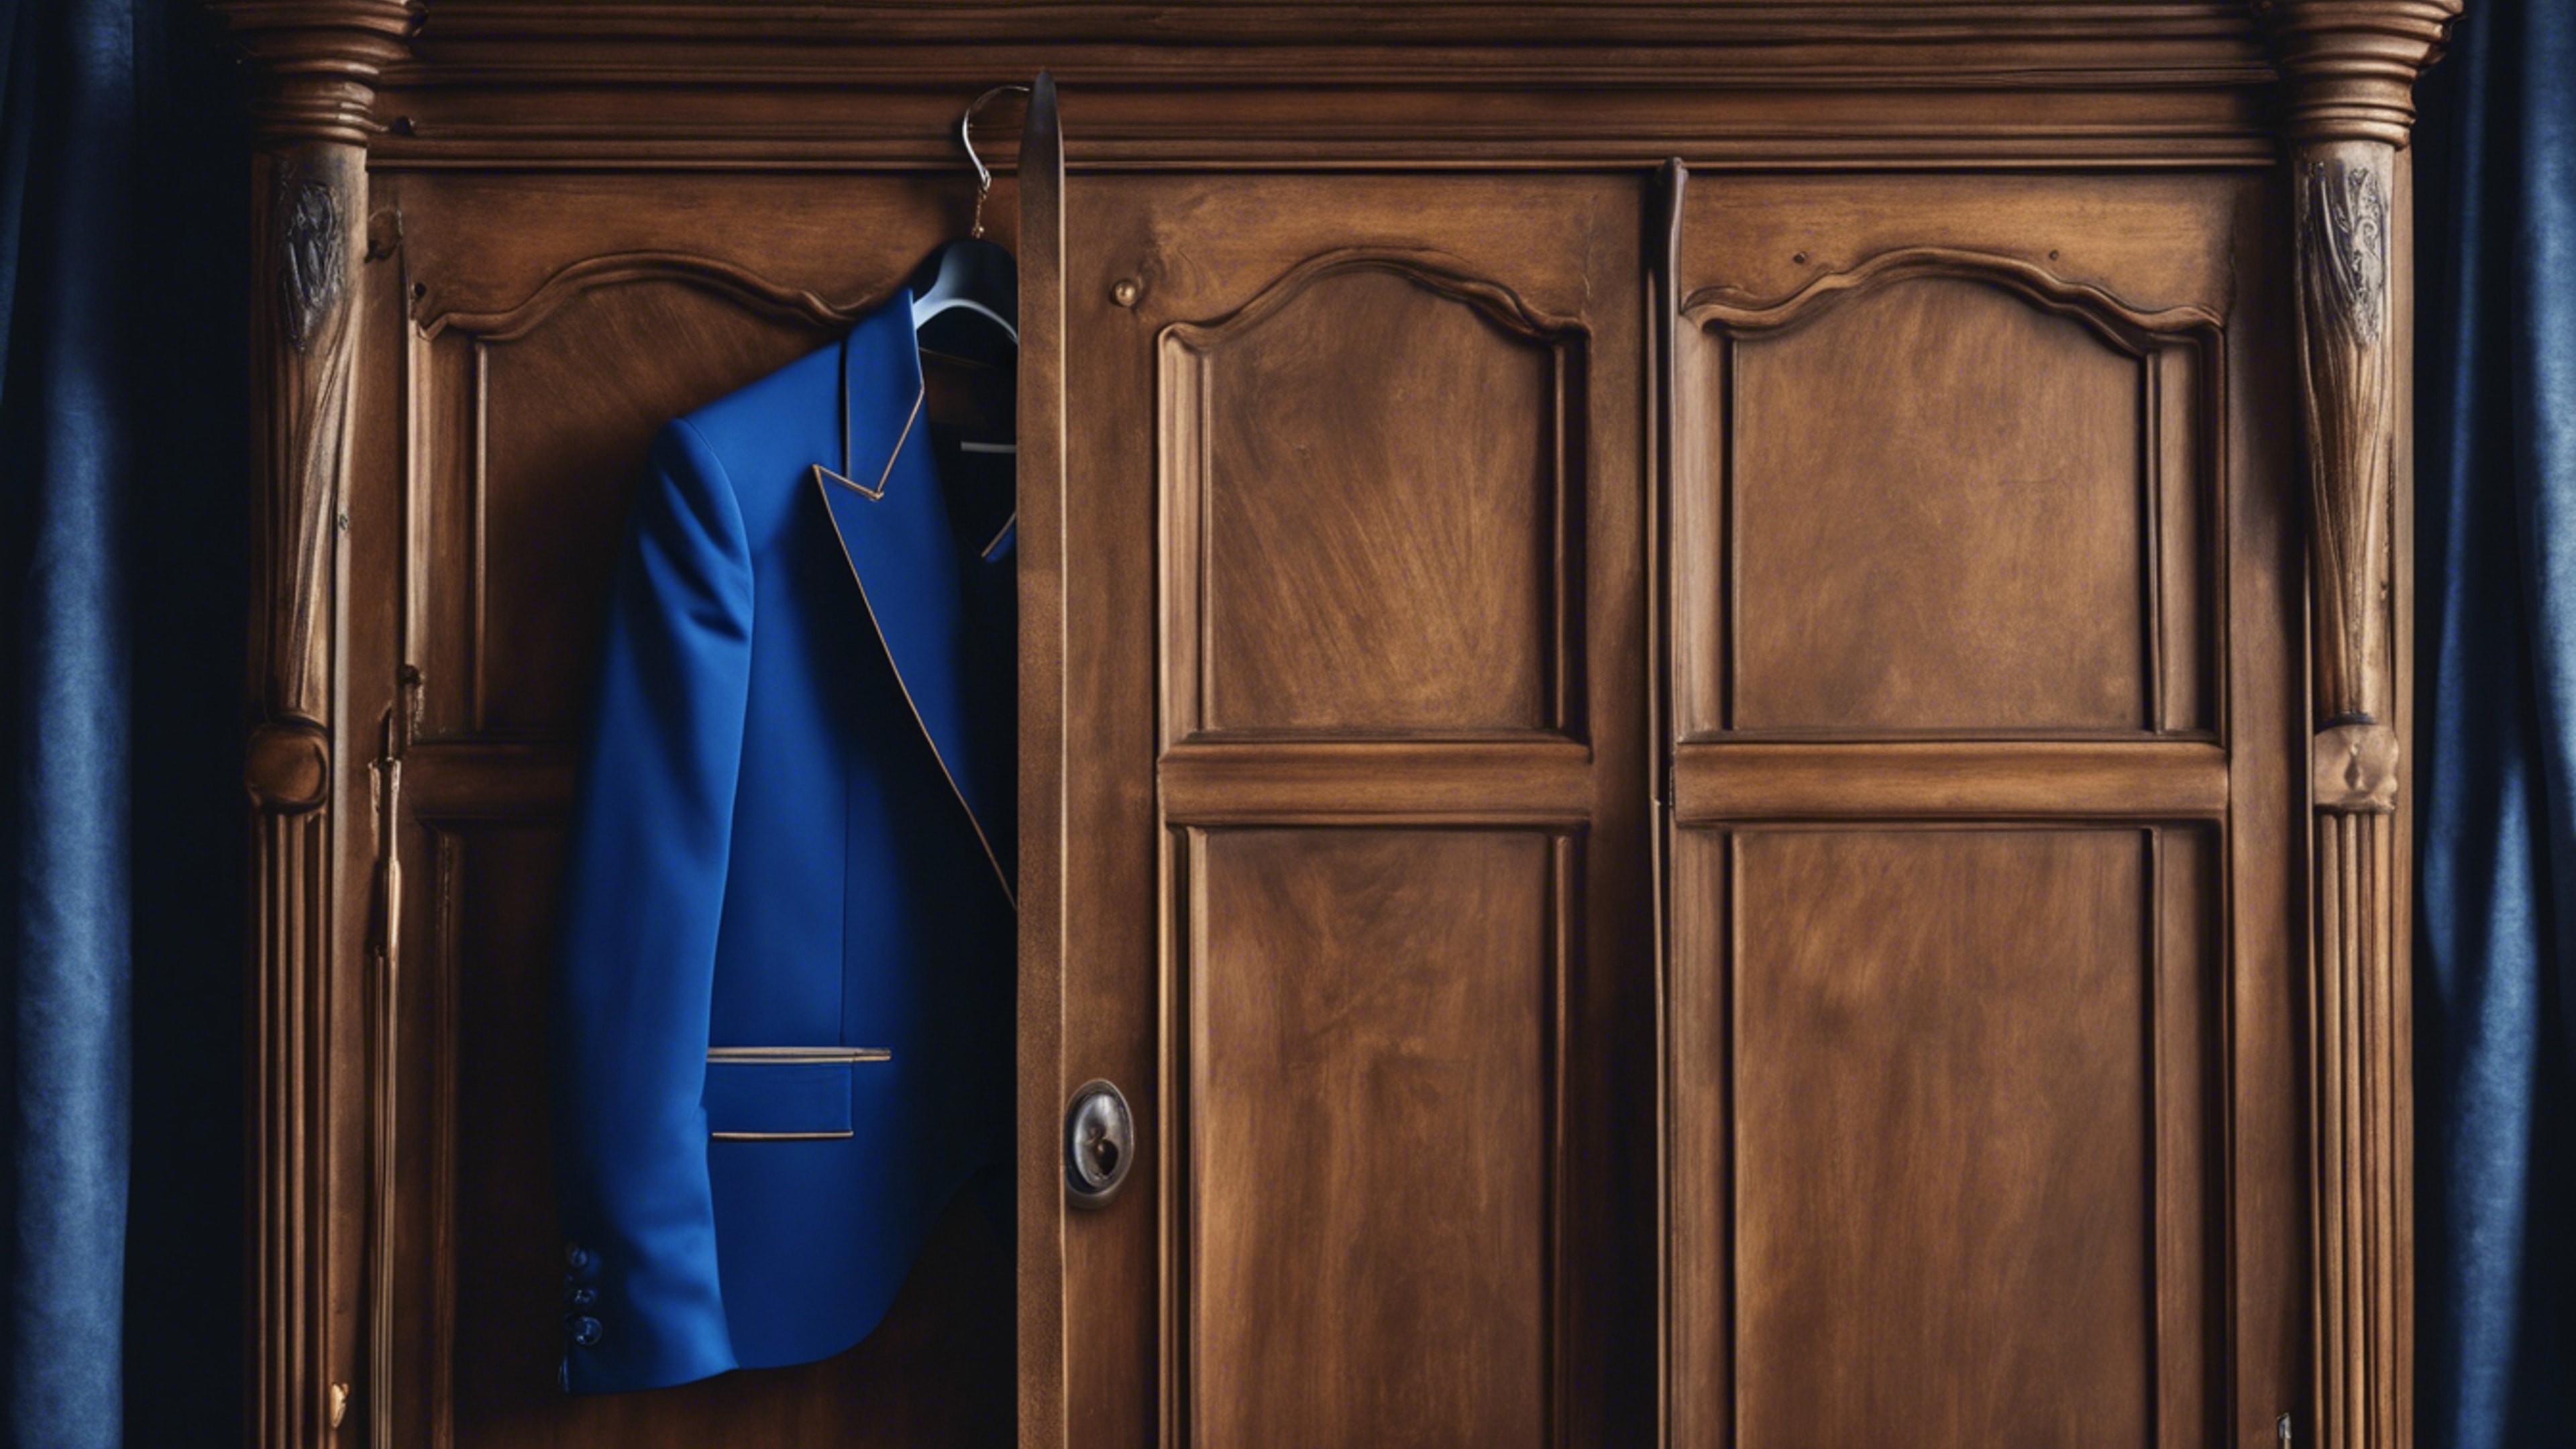 A vintage royal blue tuxedo hanging in a classic antique wardrobe. 墙纸[1e18aa866c984257b969]